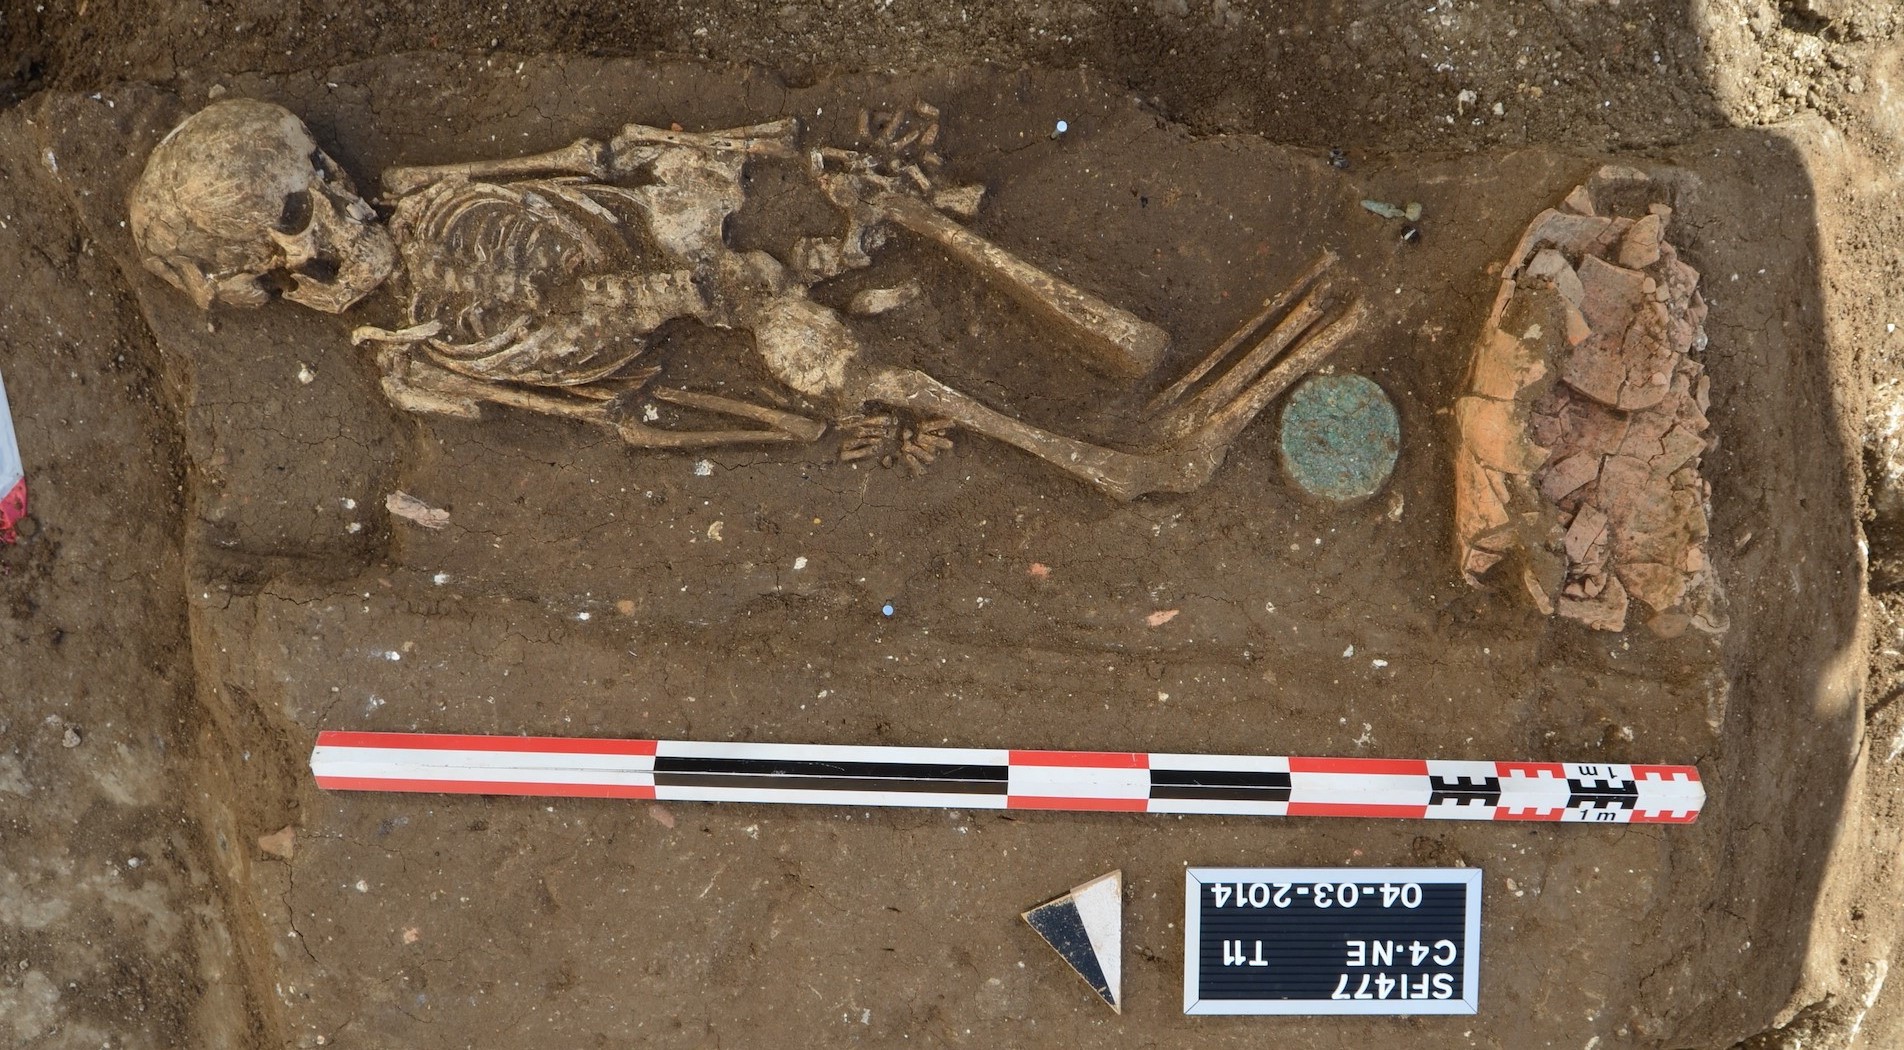 A 2,000-year-old individual sequenced in the study.